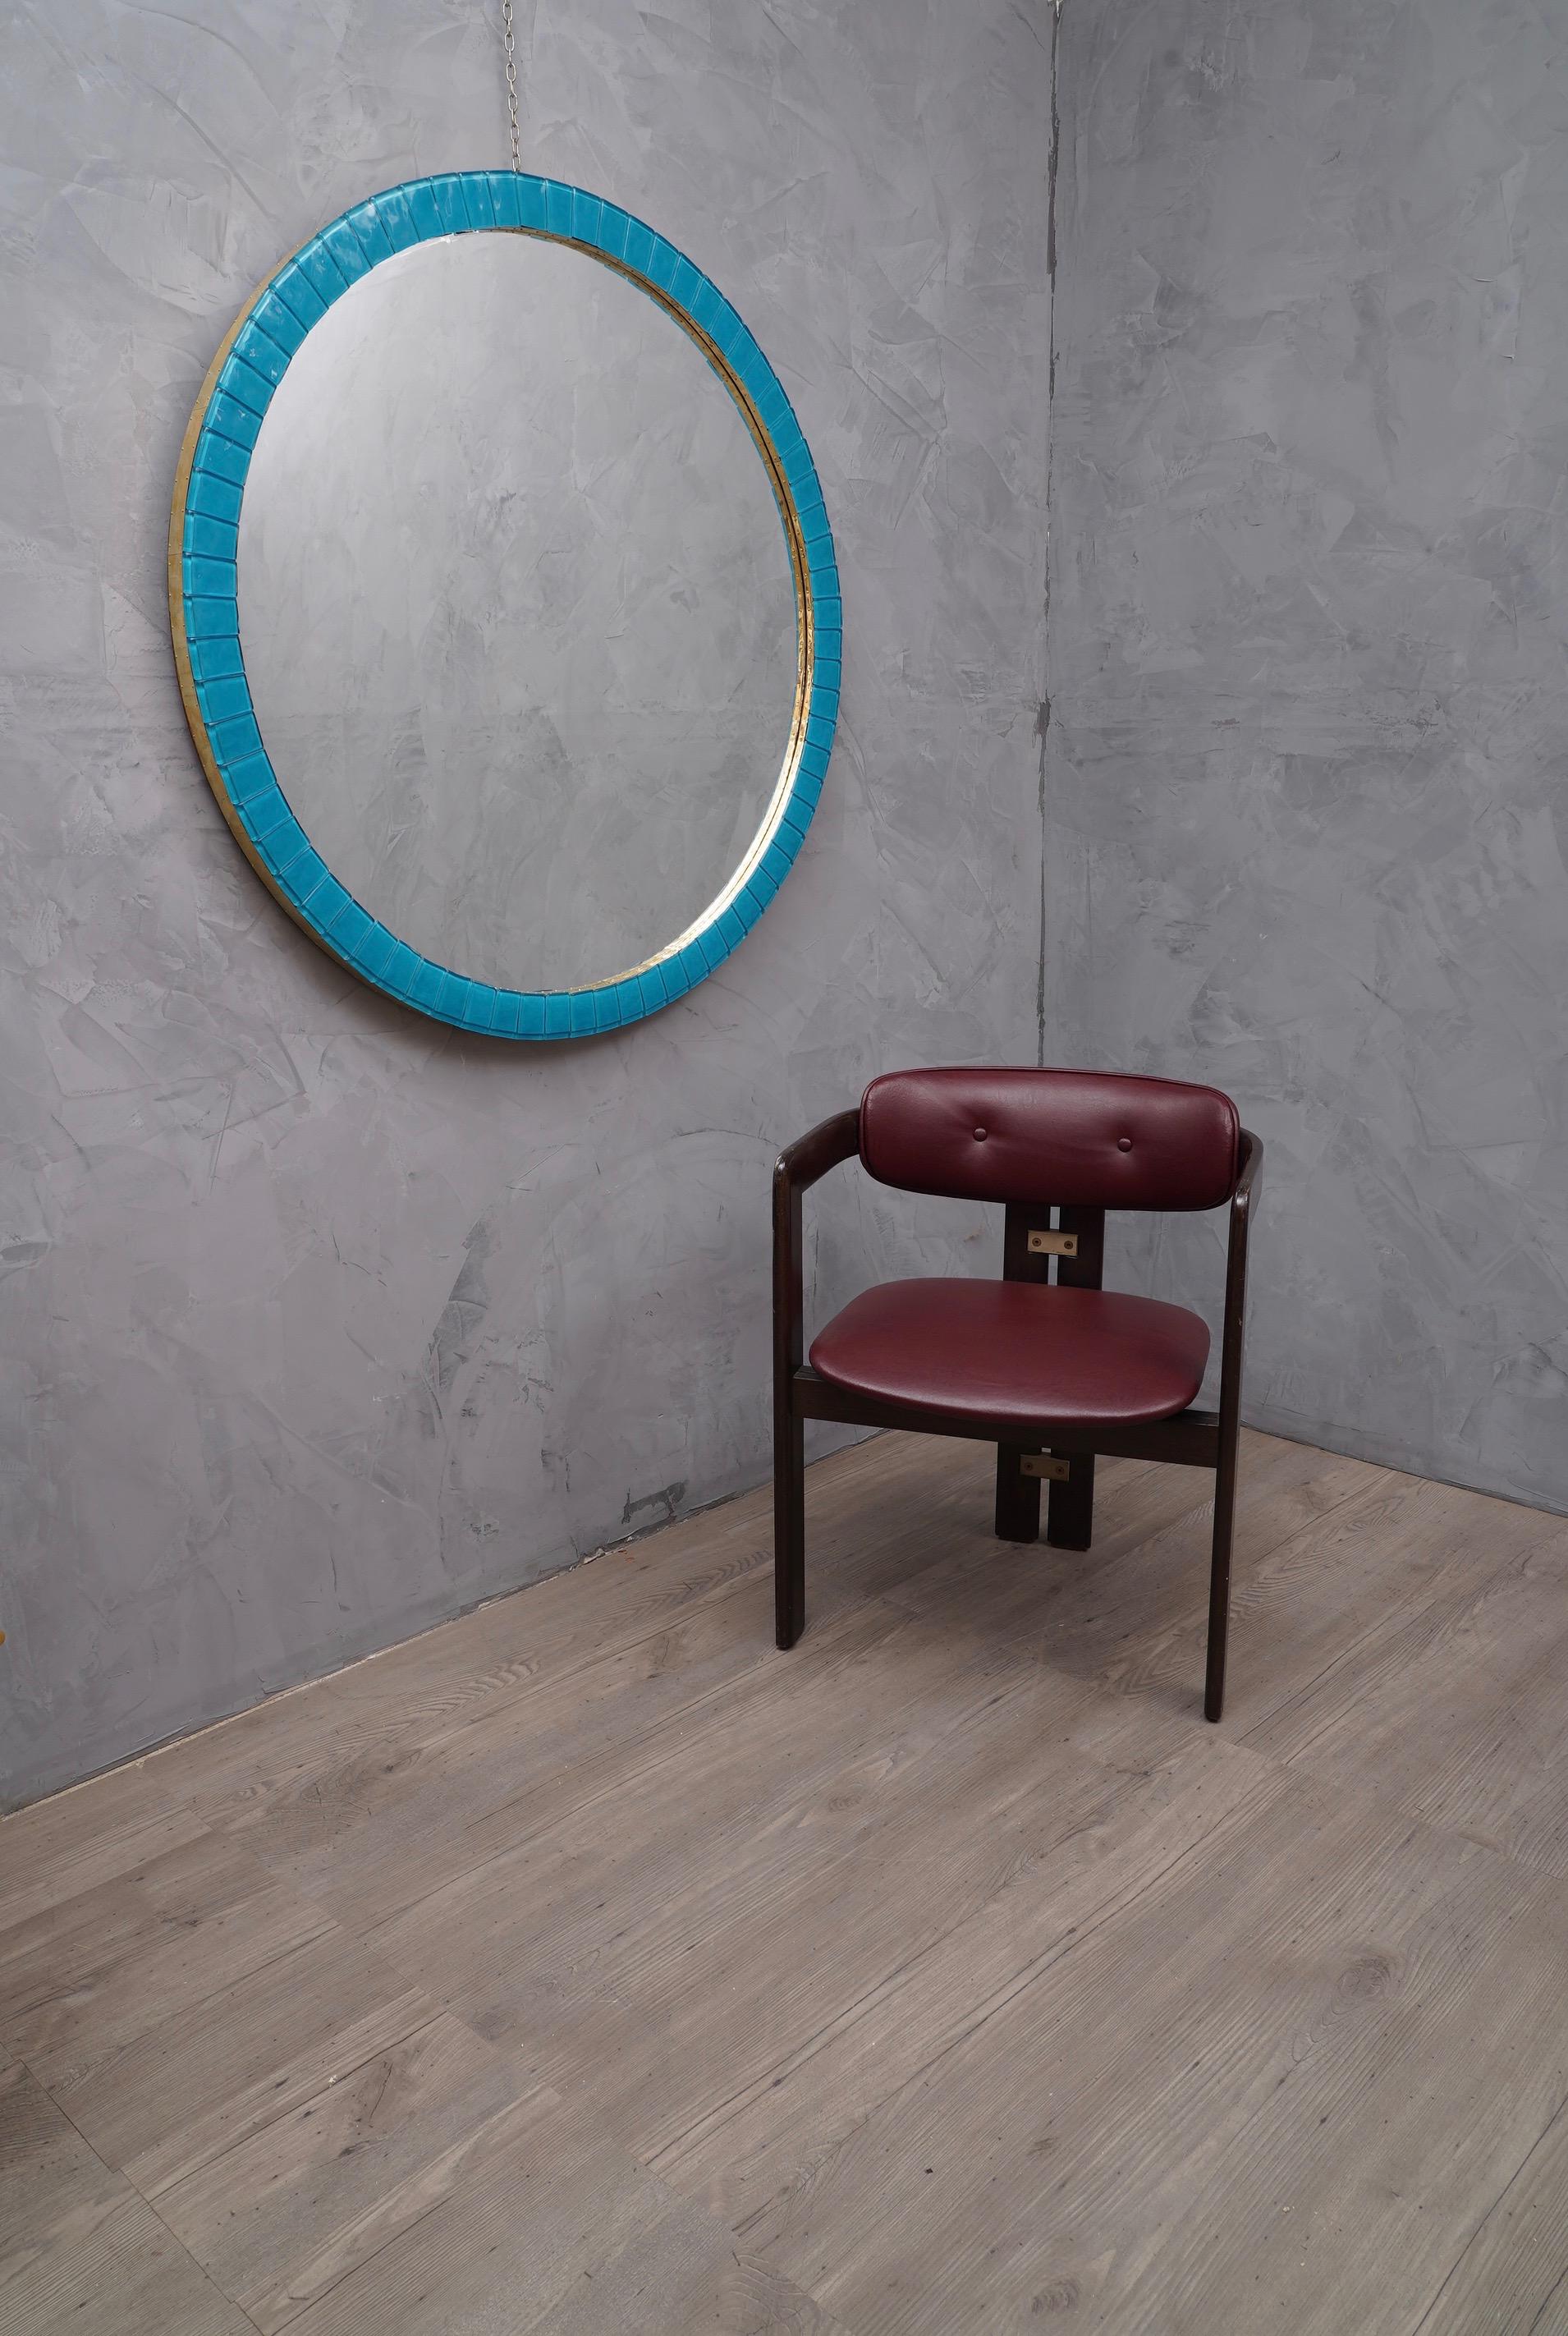 Very elegant mirror of electric blue color, the frame is very fine and precious also for the contribution of brass.

The structure of the frame is in wood round in shape, above are applied small bricks in blue Murano glass. Along the two lateral